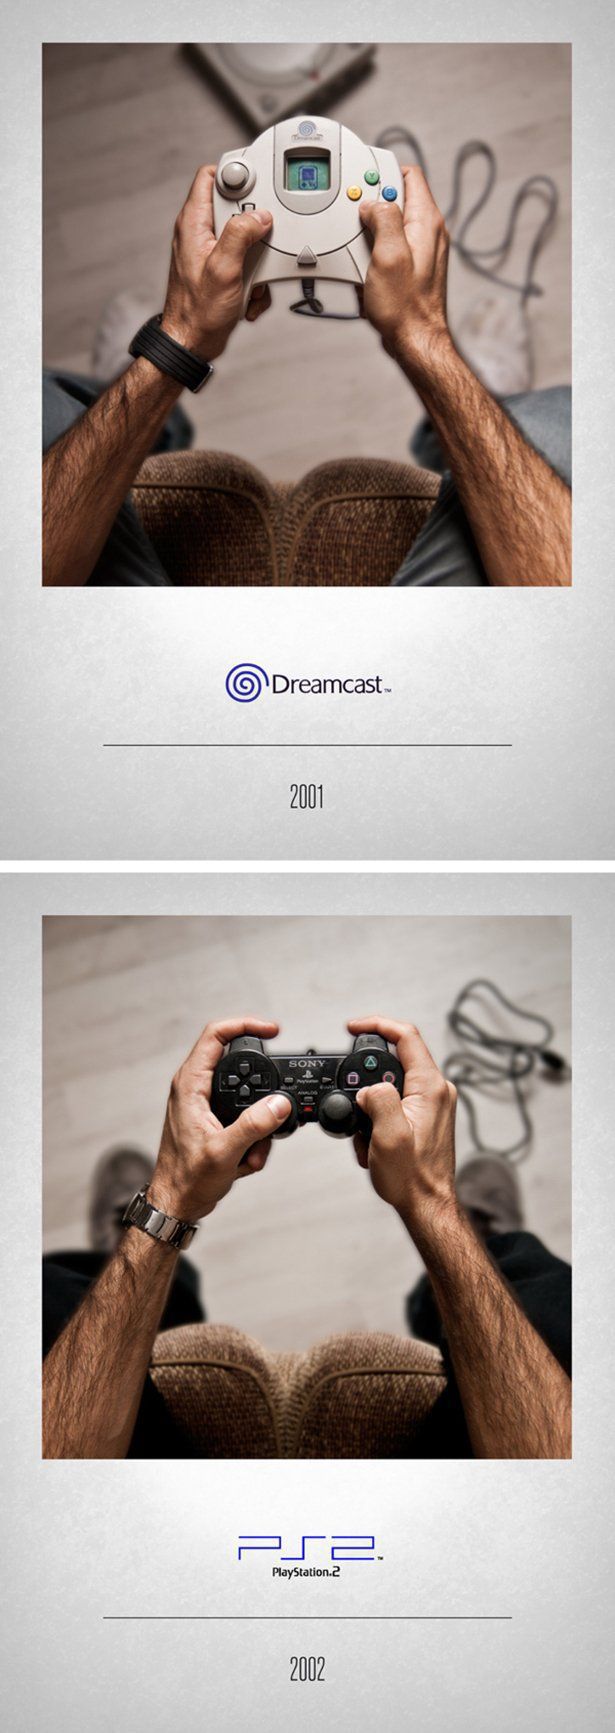 How Video Game Controllers Have Changed Over the Years